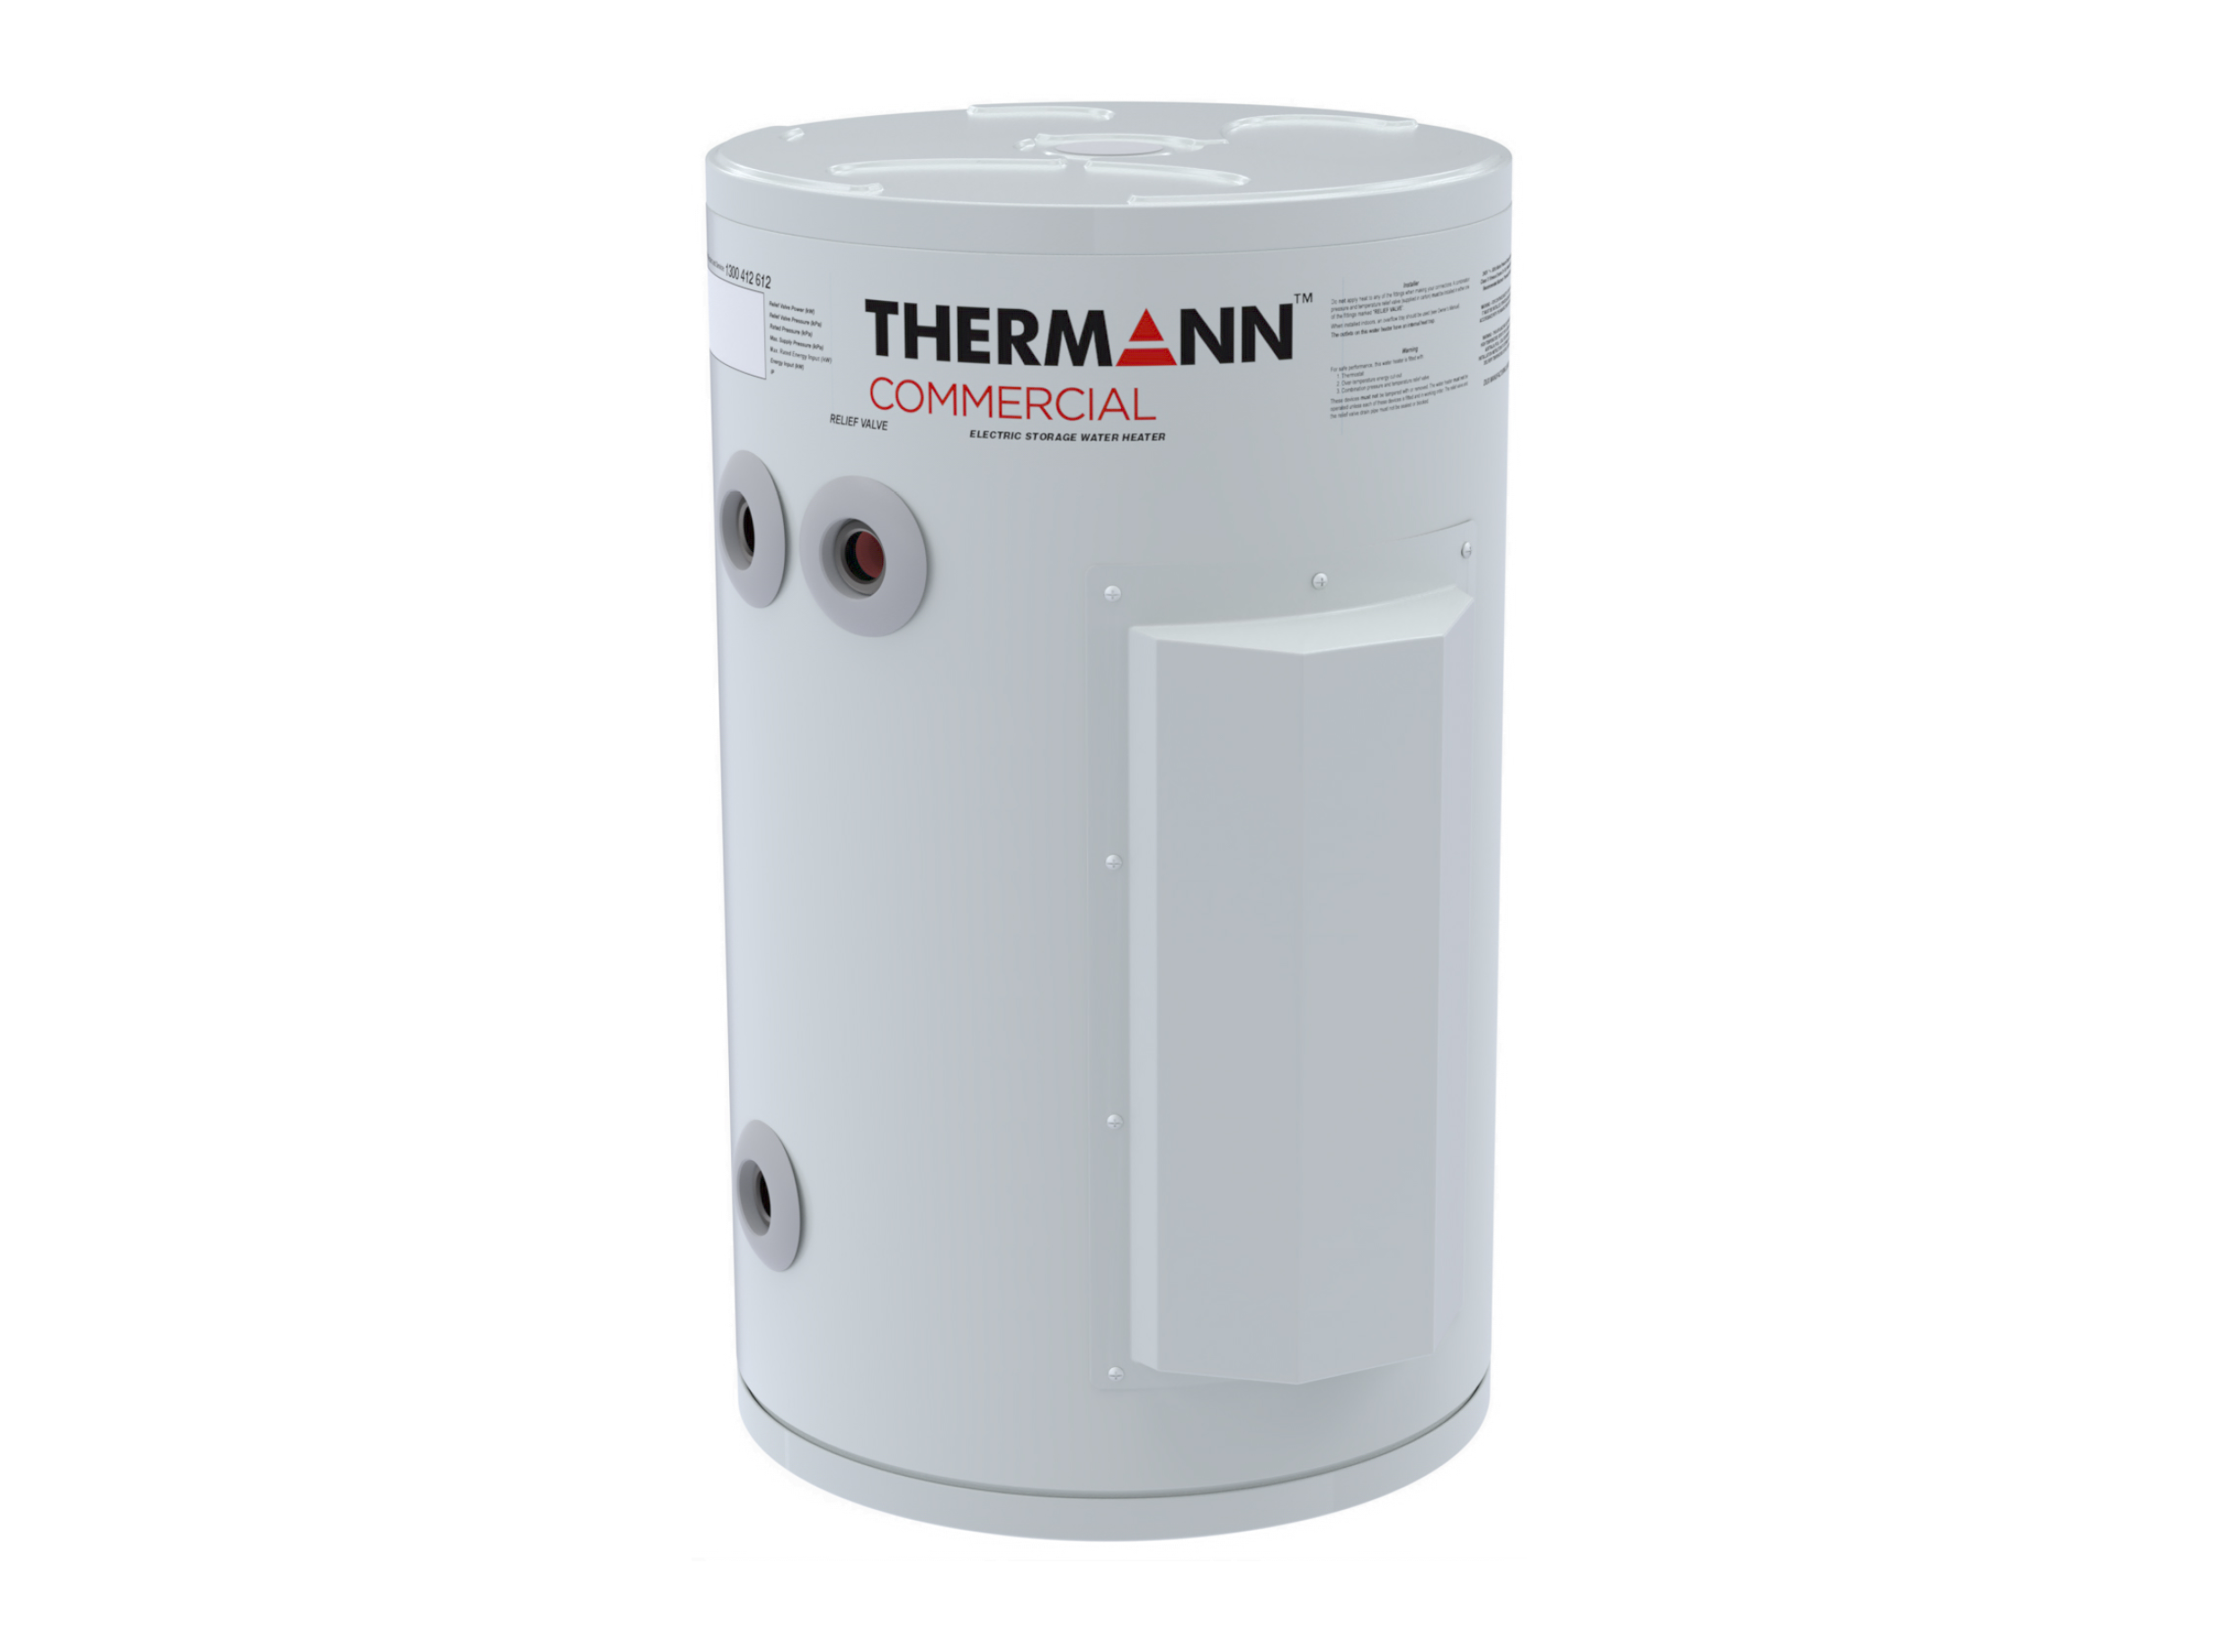 Therman_commercial_50l_electric_storage